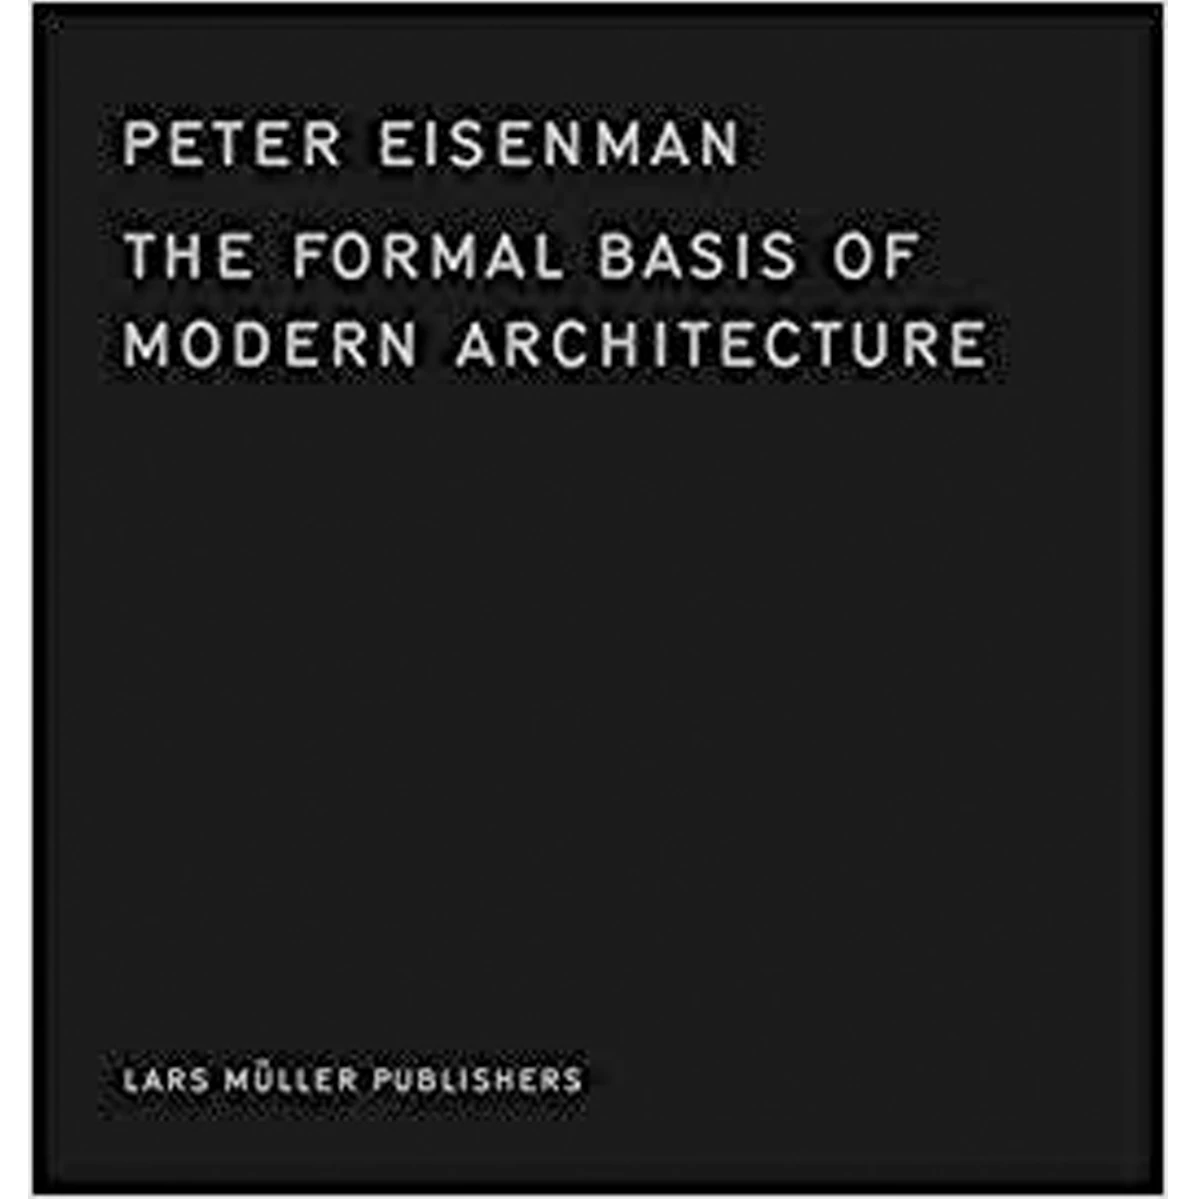 The Formal Basis of Modern Architecture